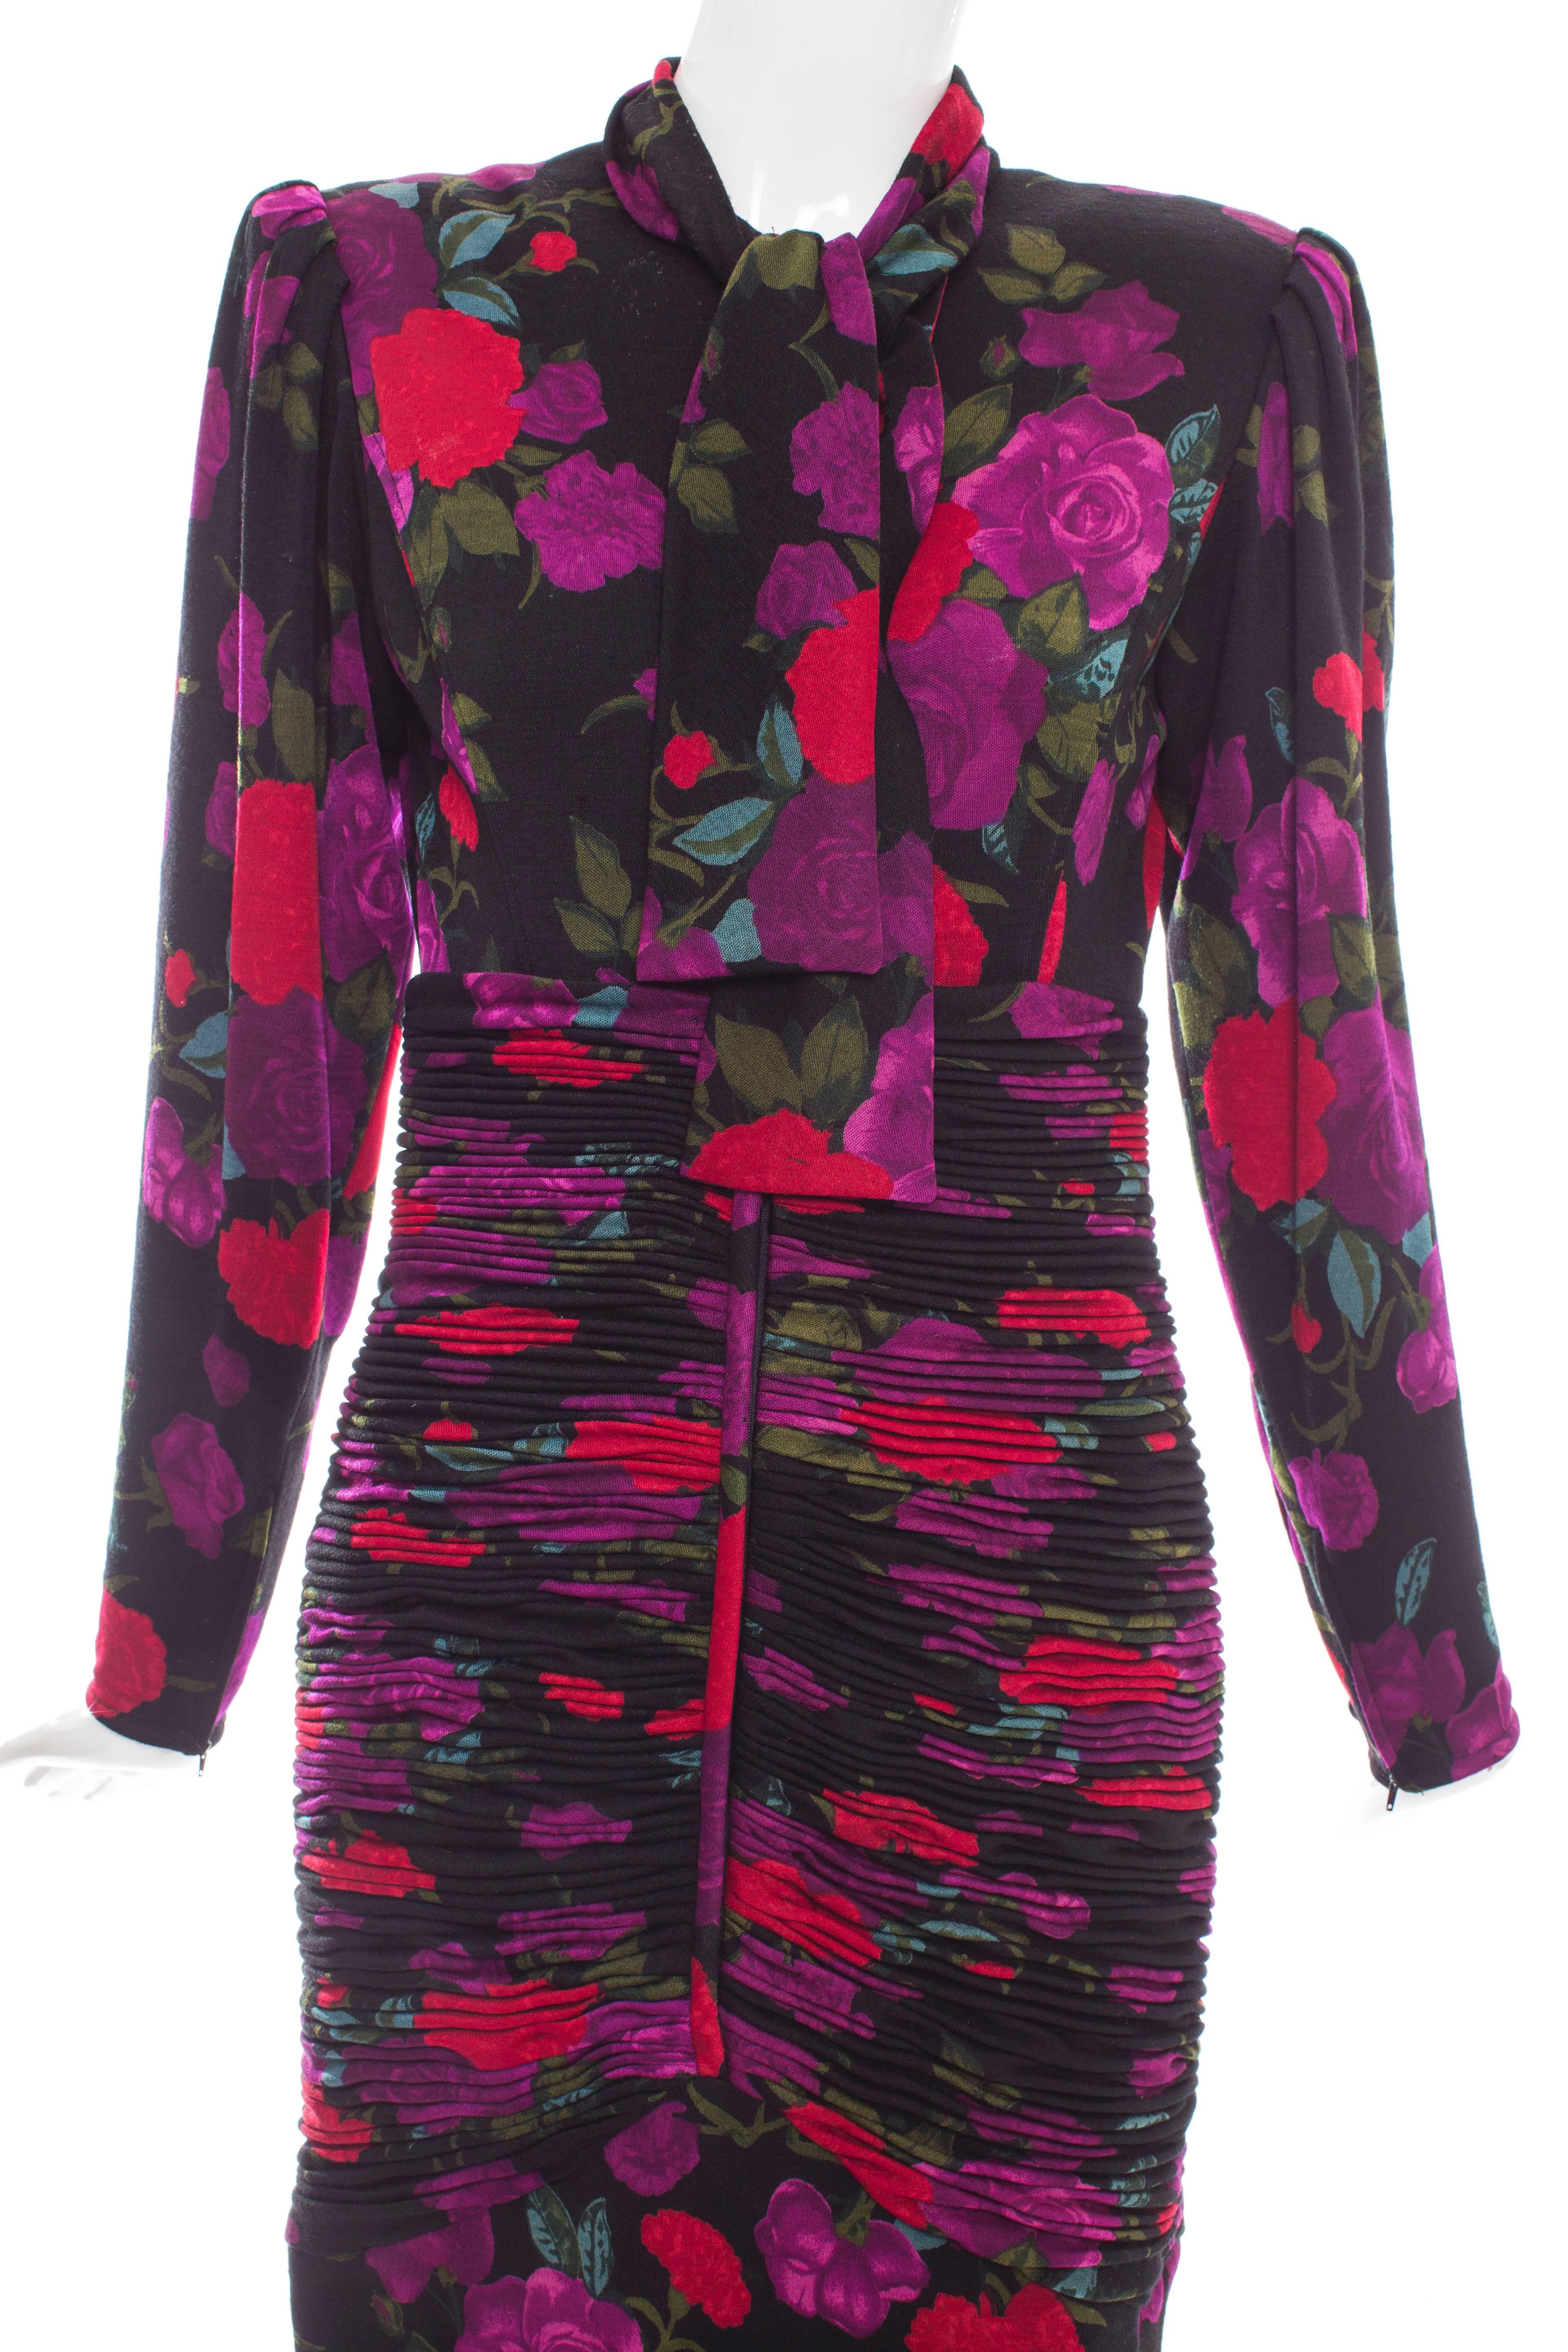 Women's Emanuel Ungaro Floral Wool Jersey Ruched Dress, Circa 1980's For Sale